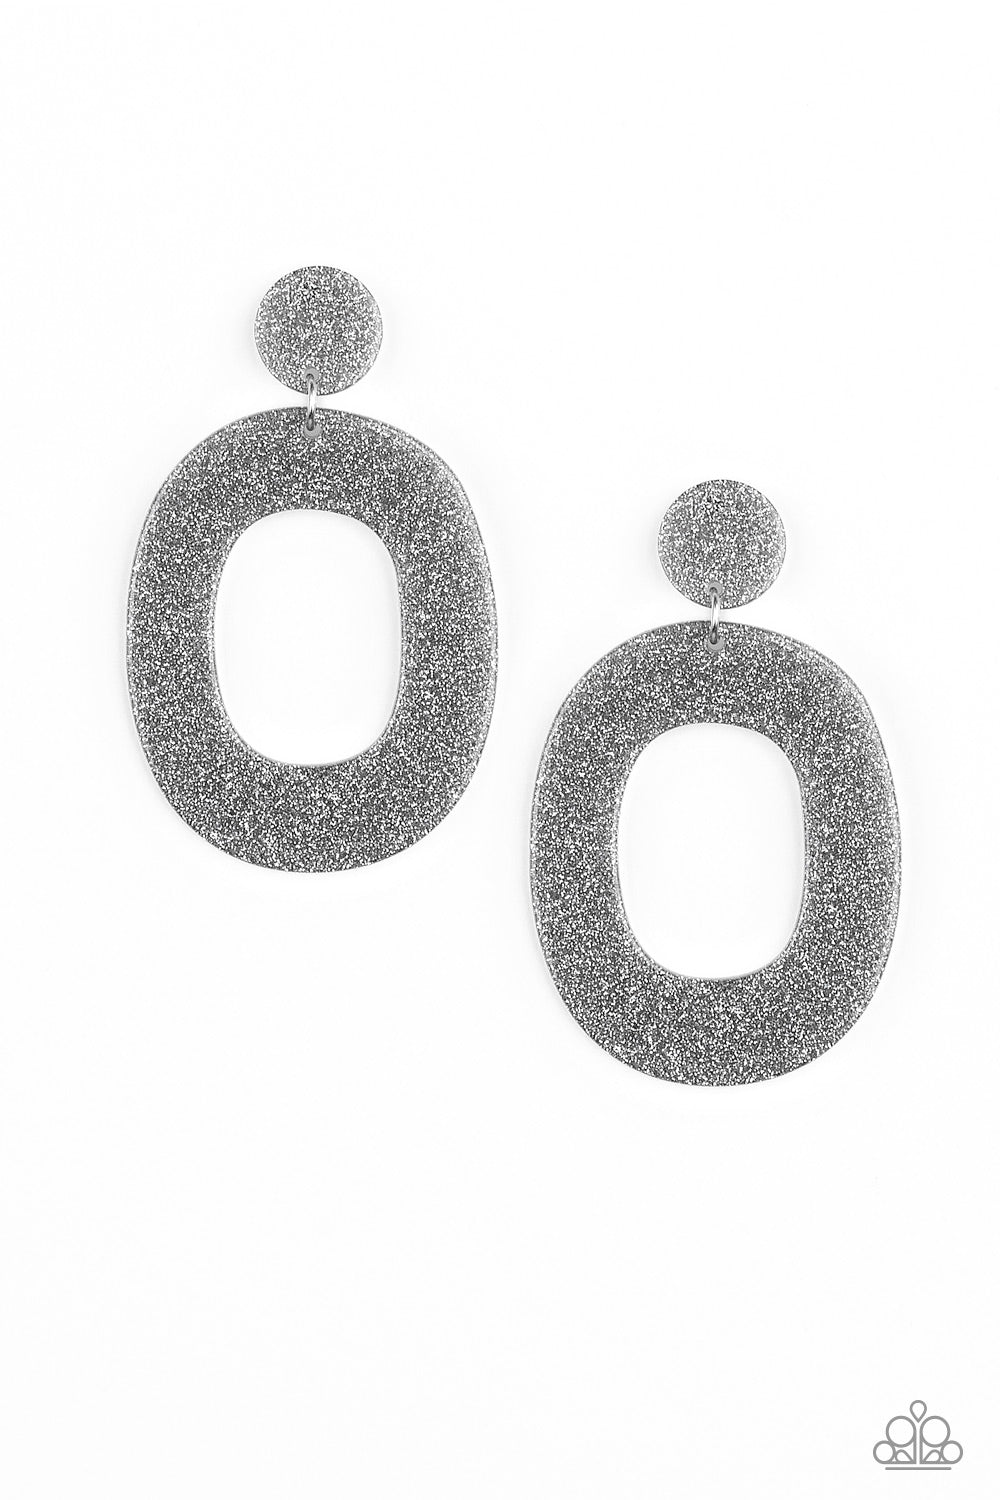 Paparazzi Accessories Miami Boulevard - Silver Earring - Be Adored Jewelry